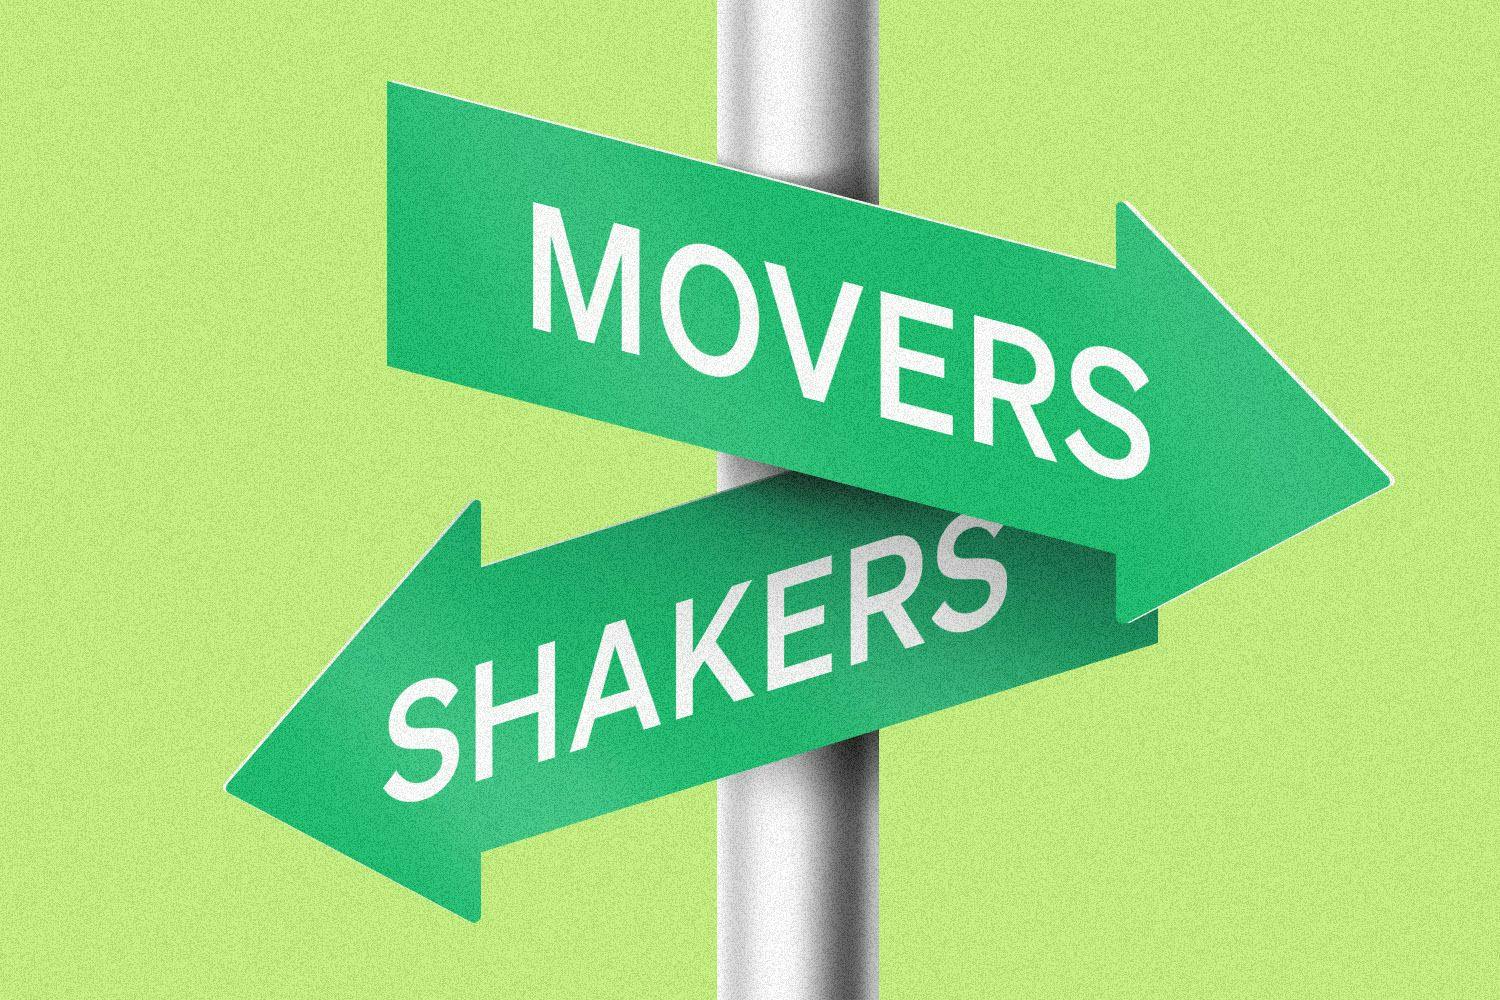 A sign saying "movers and shakers"